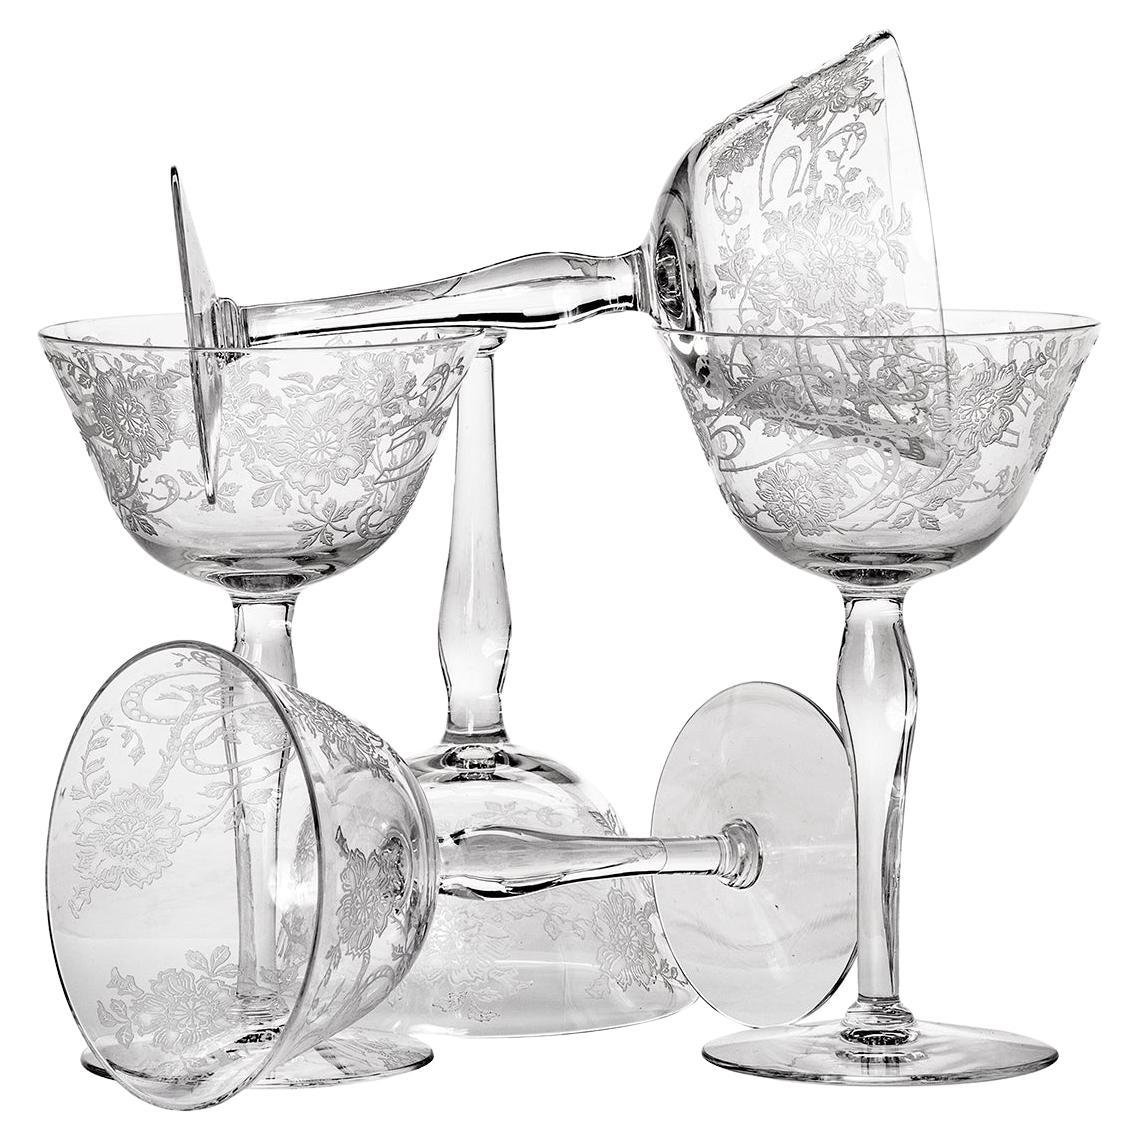 Late French Deco crystal stemware C1920-30's. Set of 5 in excellent condition. Fine blown glass featuring etched swirly pattern of flowers with leaves & branches. The glasses have a beautiful weight to them and are in excellent condition.